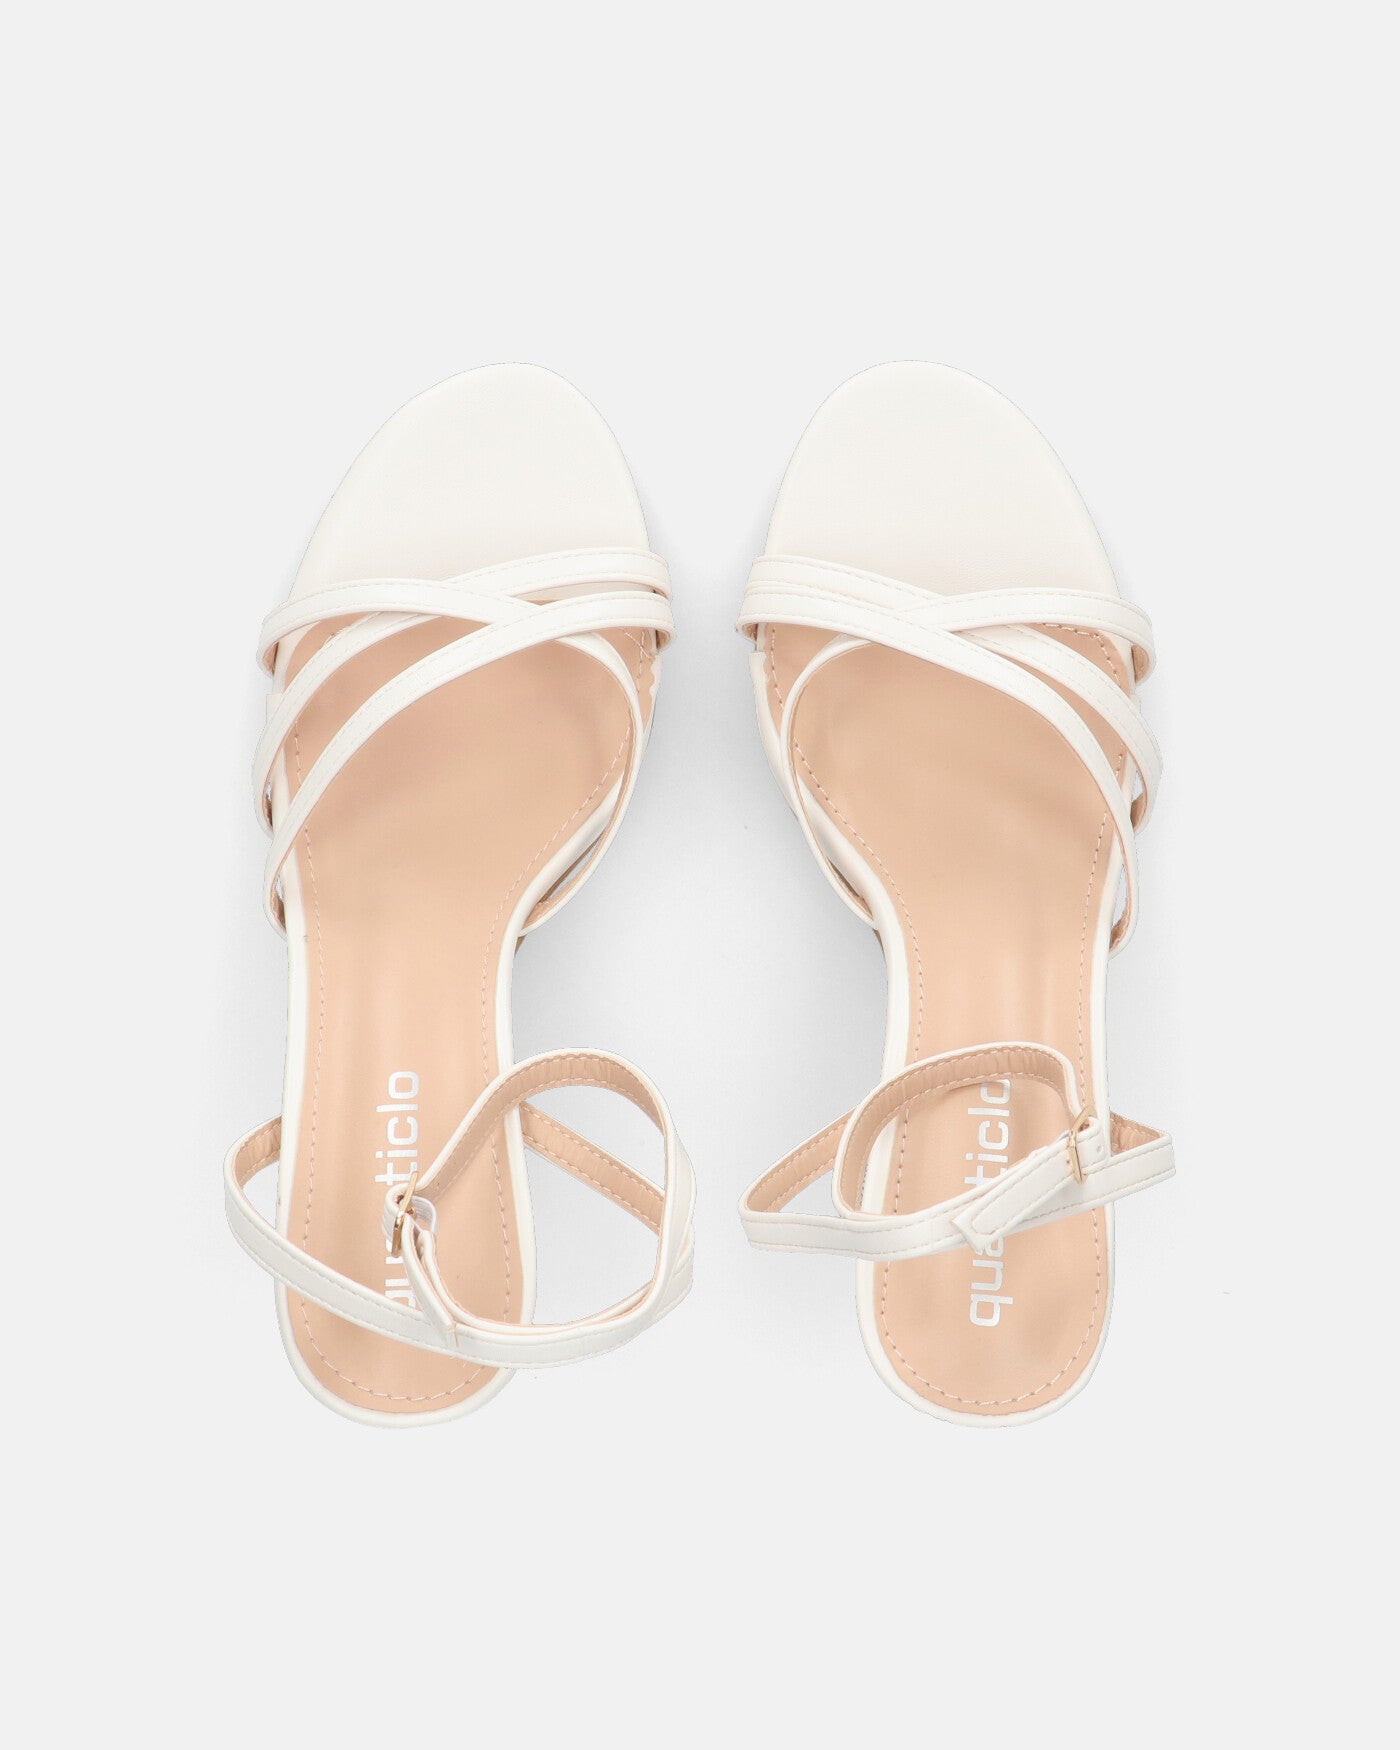 PHENYO - white high heels with strap and beige sole